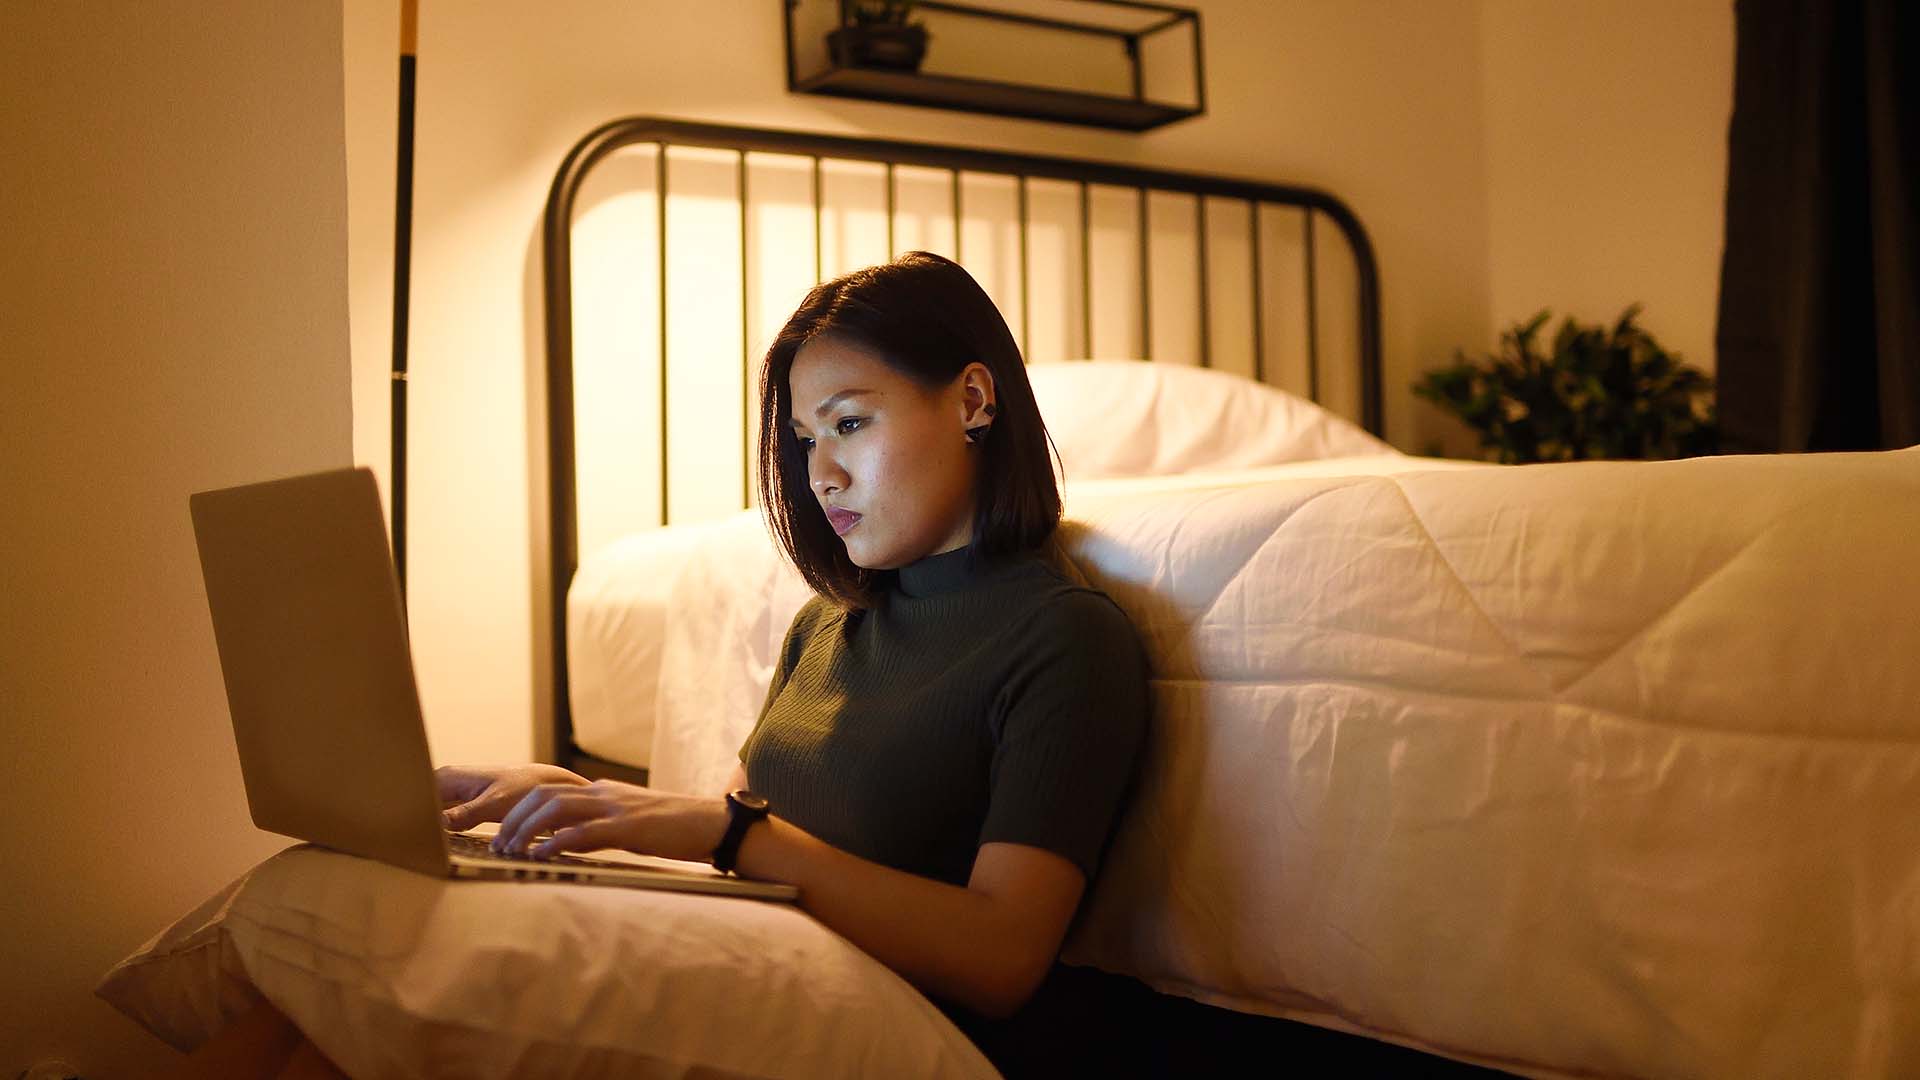 Person leaning against bed staring at laptop propped on her lap